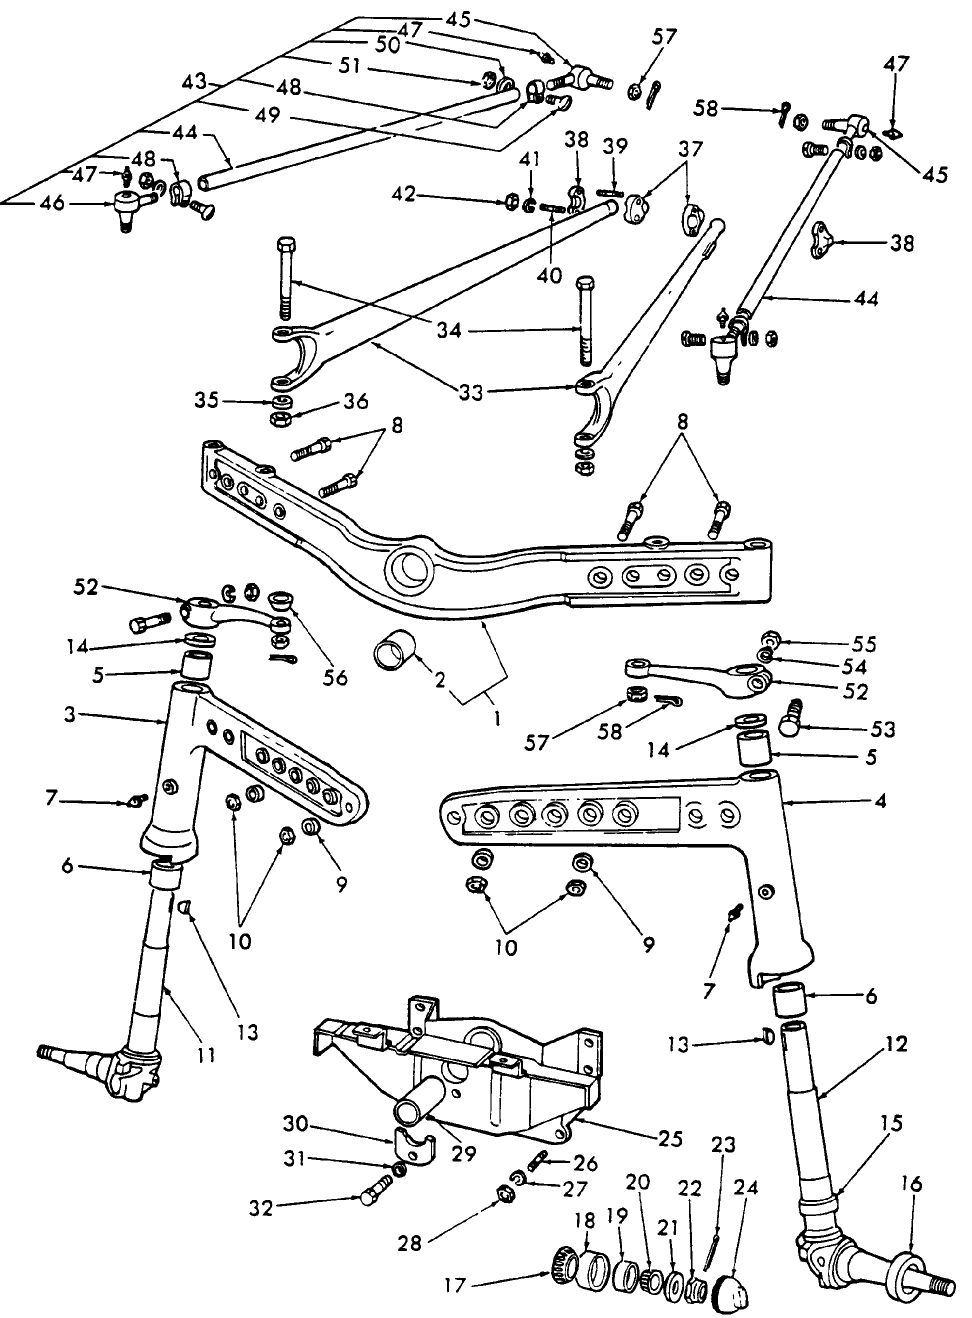 03A01 FRONT AXLE